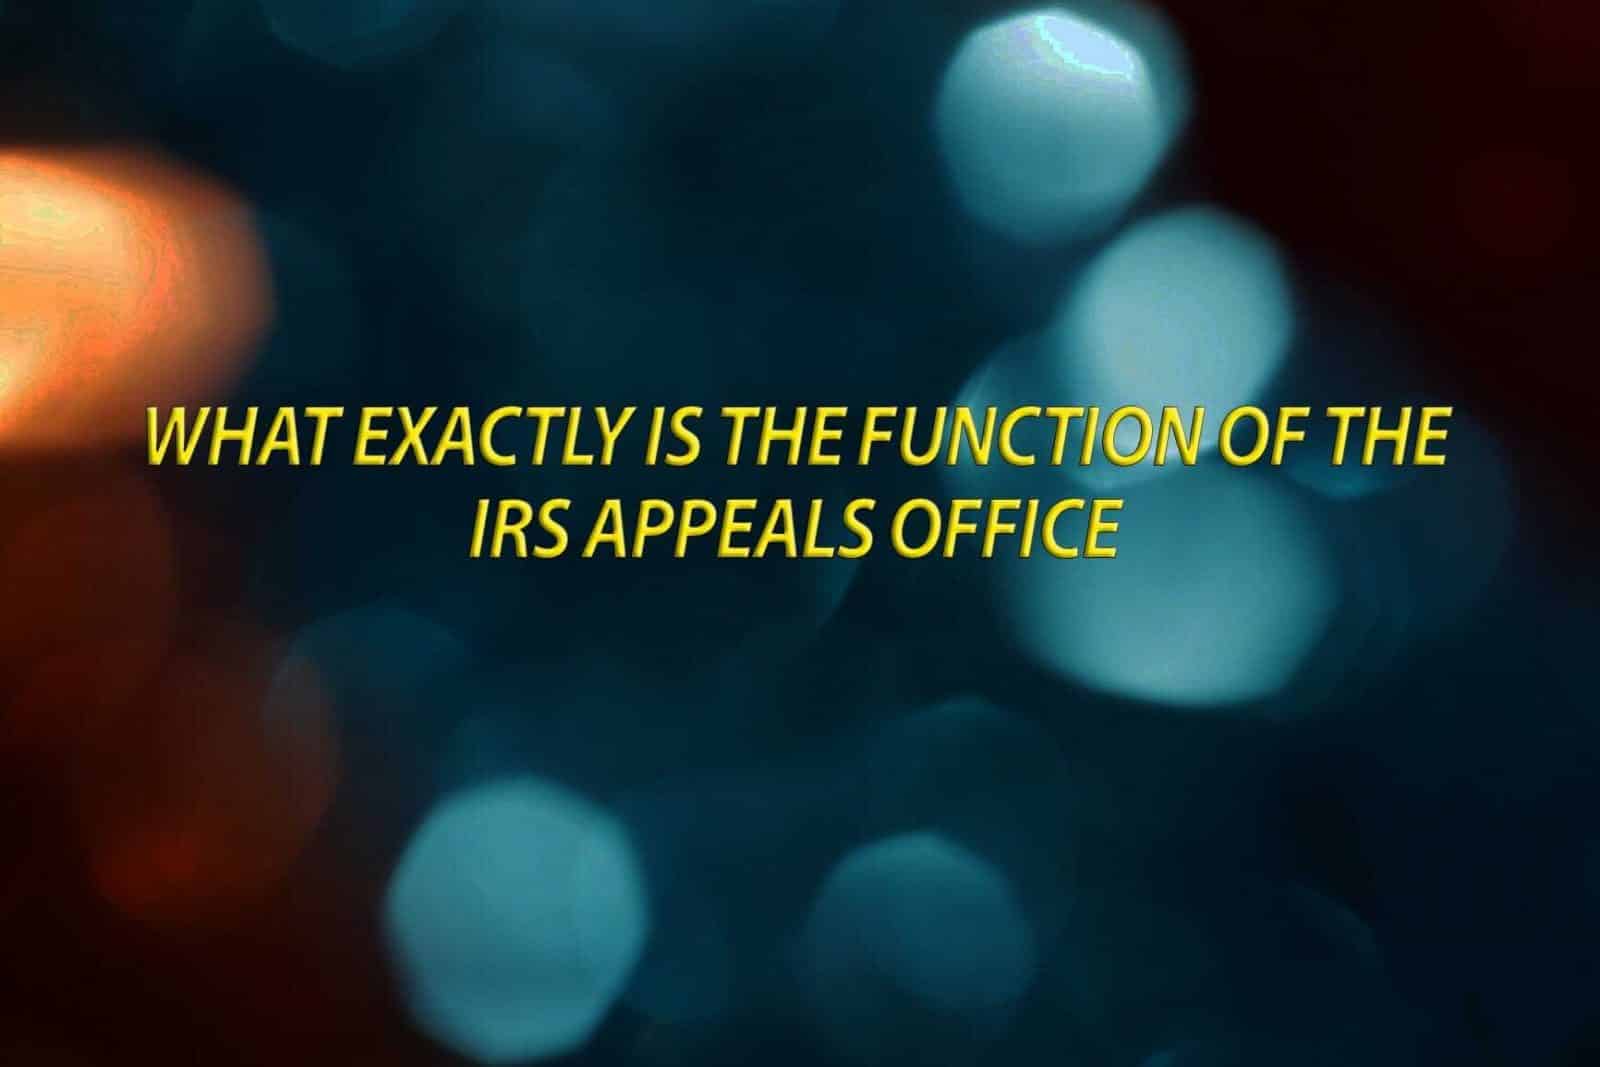 What exactly is the function of the IRS appeals office